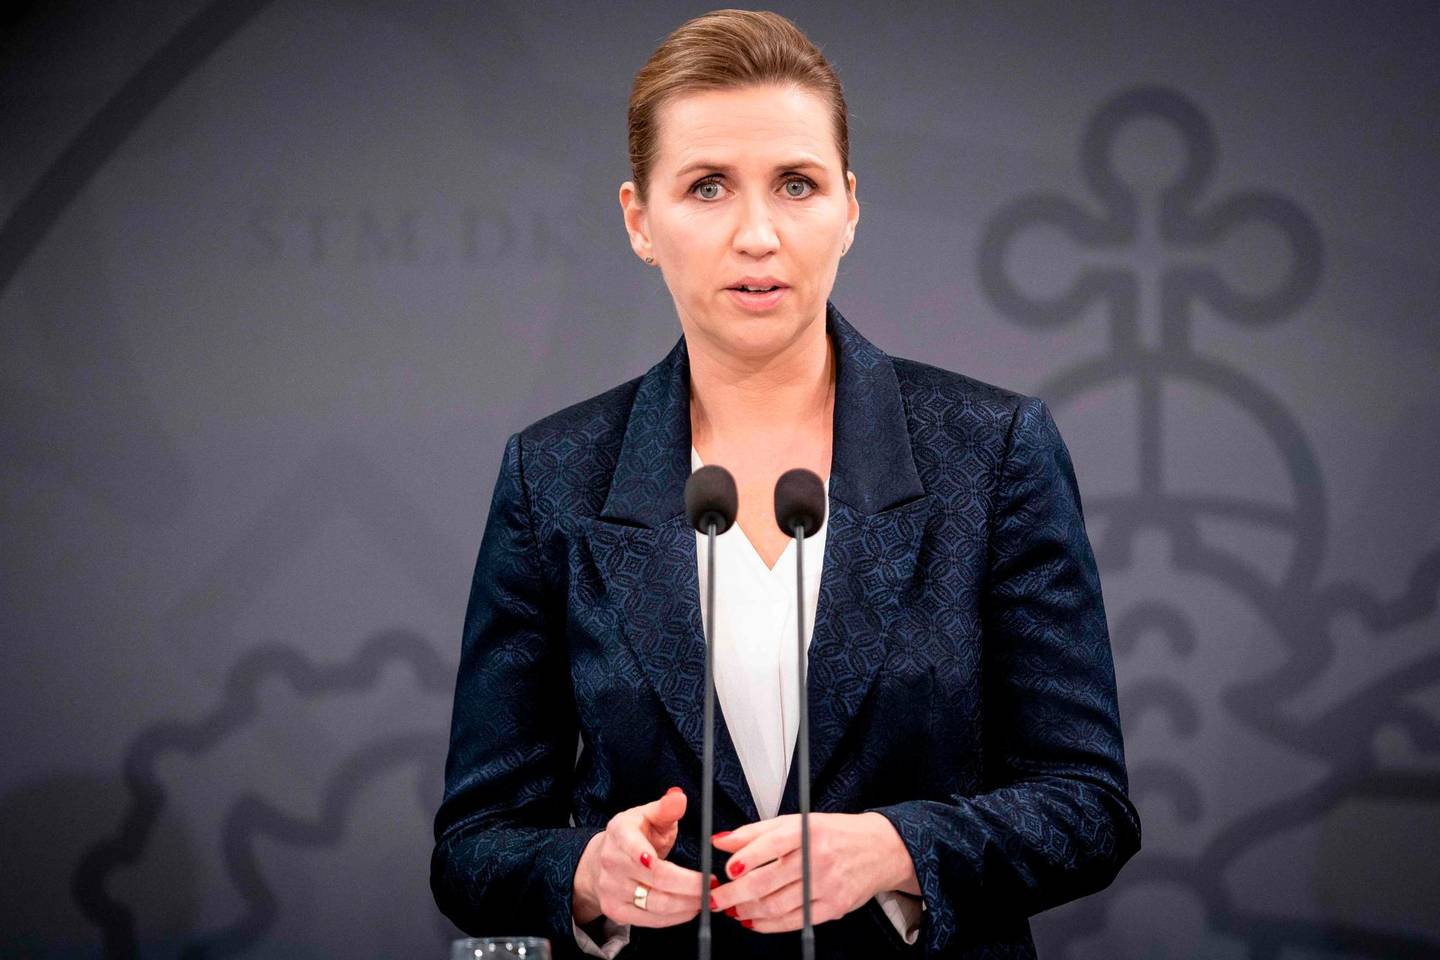 Denmark's Prime Minister Mette Frederiksen attends a Covid-19 press conference in the Prime Minister's Office in Copenhagen, on october 23, 2020. (Photo by Mads Claus Rasmussen / Ritzau Scanpix / AFP) / Denmark OUT